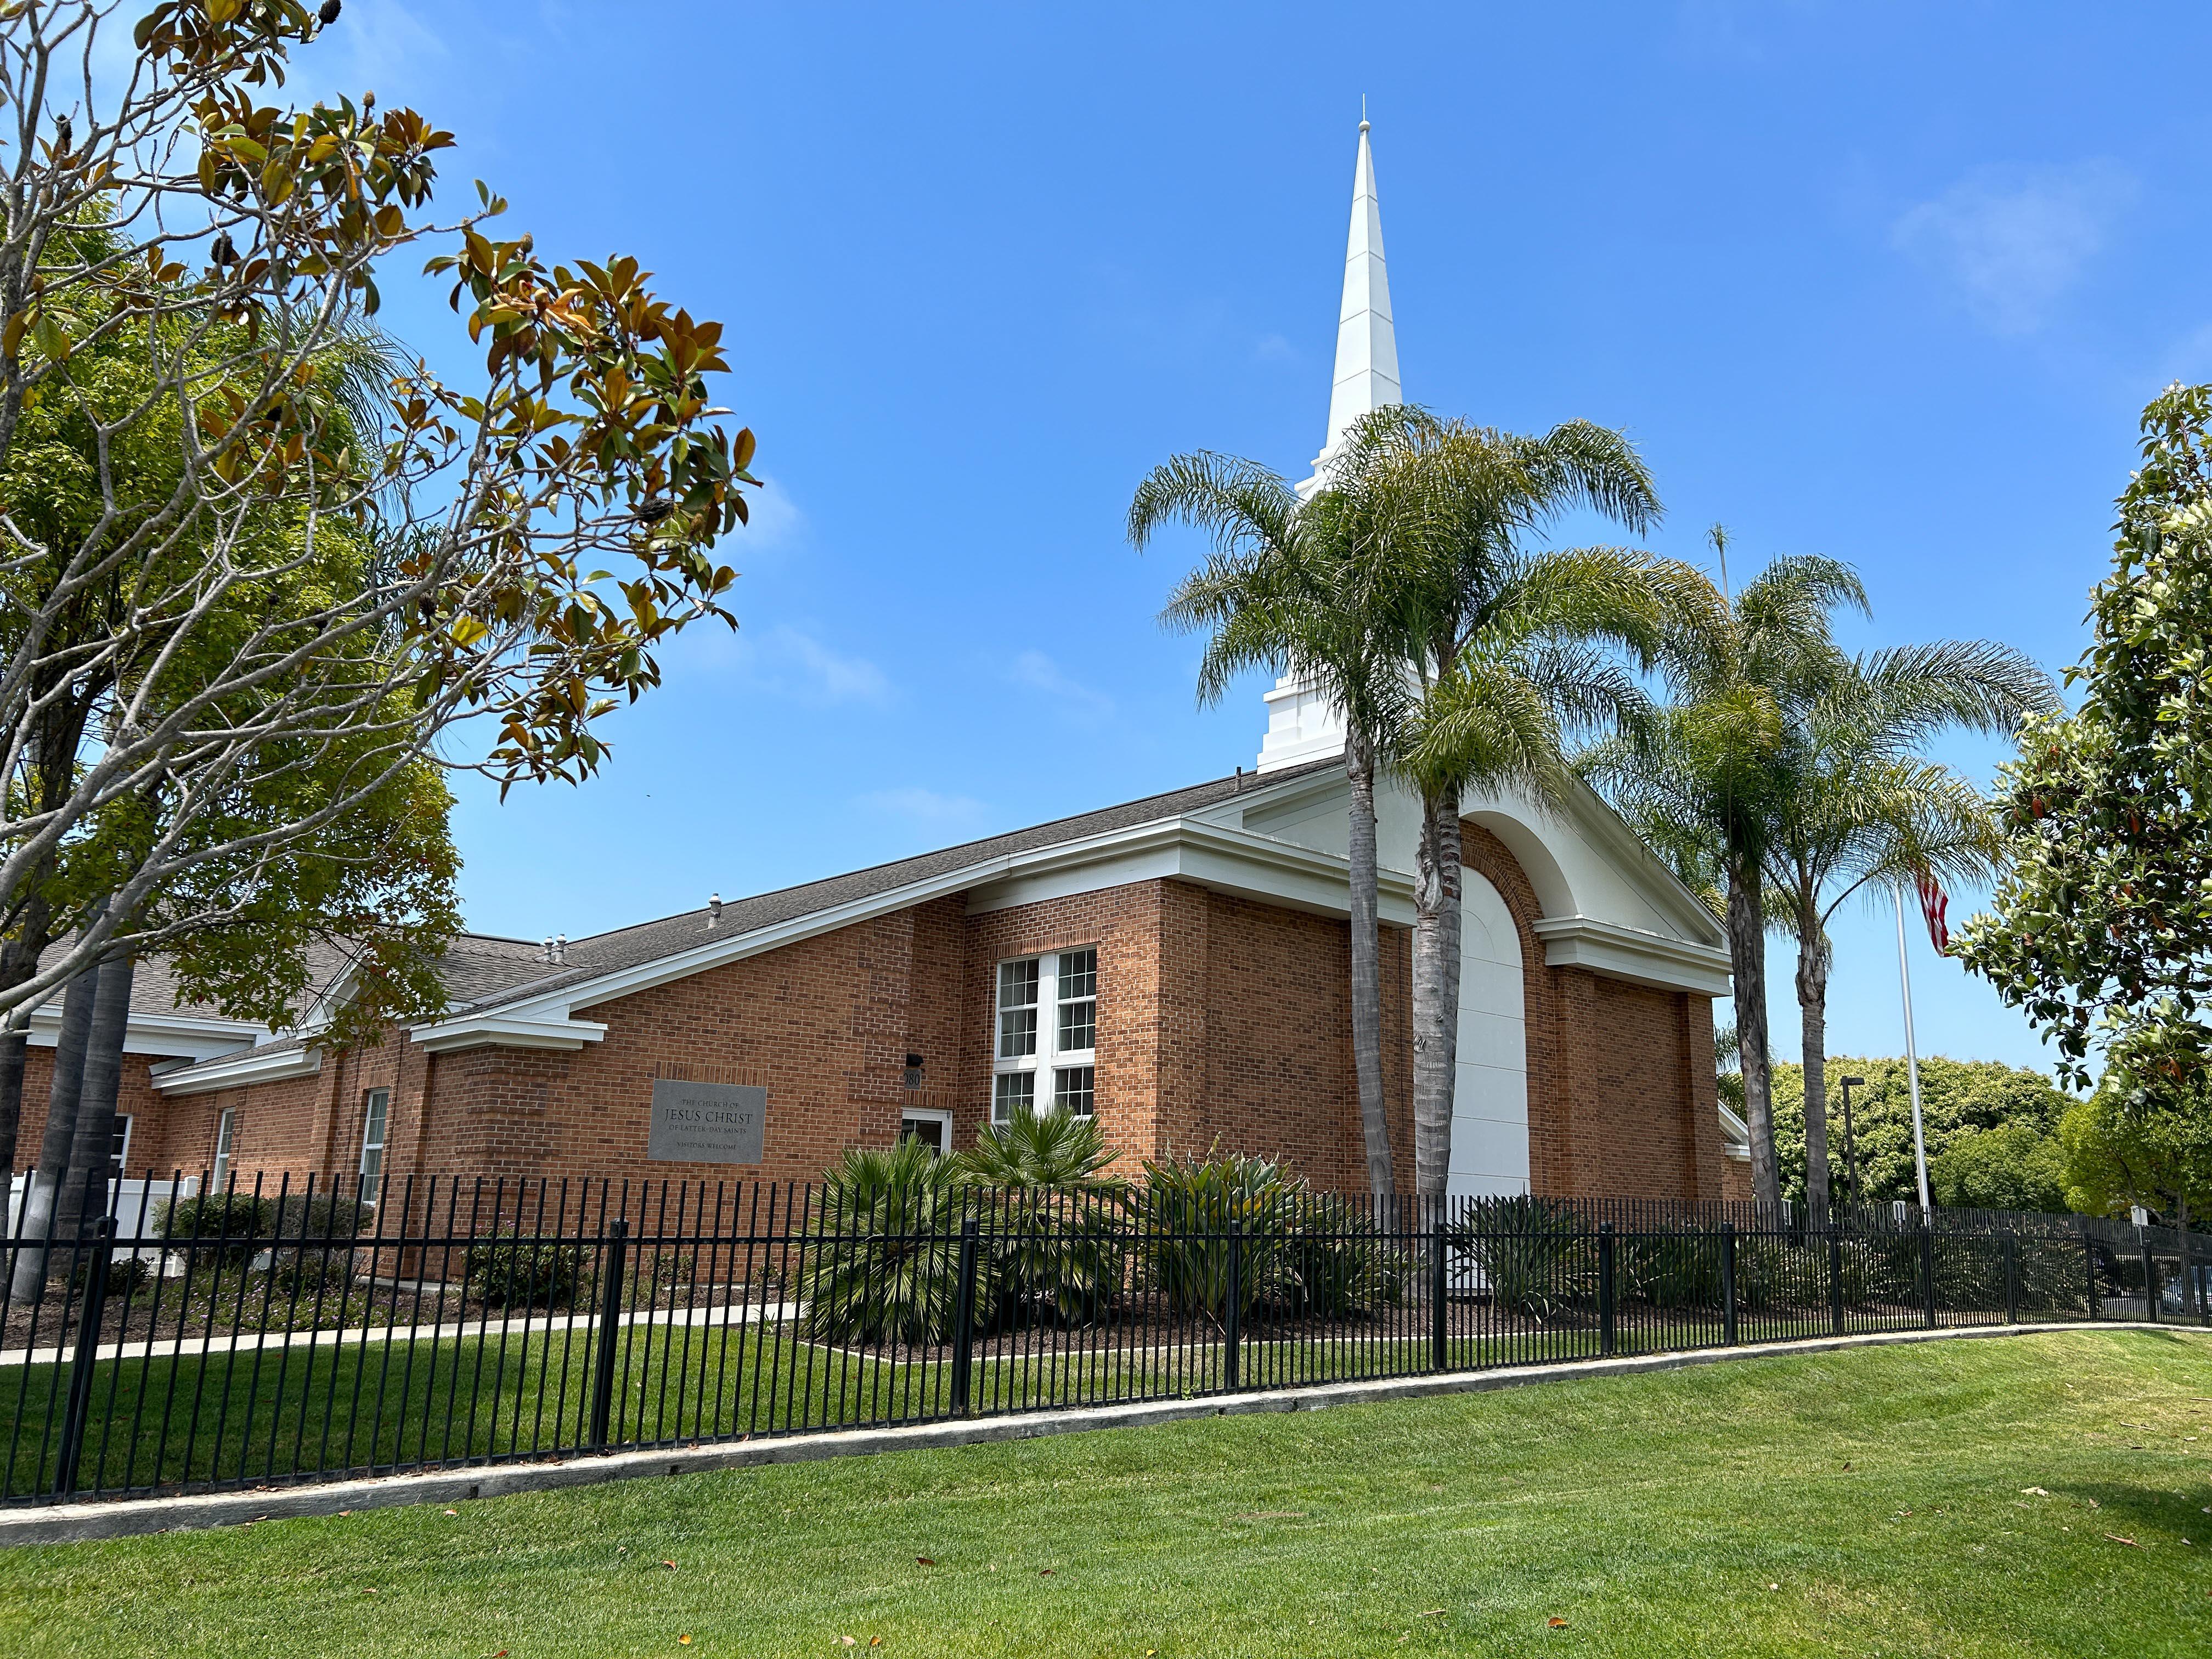 California Building of The Church of Jesus Christ of Latter-day Saints located at 2080 California Street, Oceanside, CA,